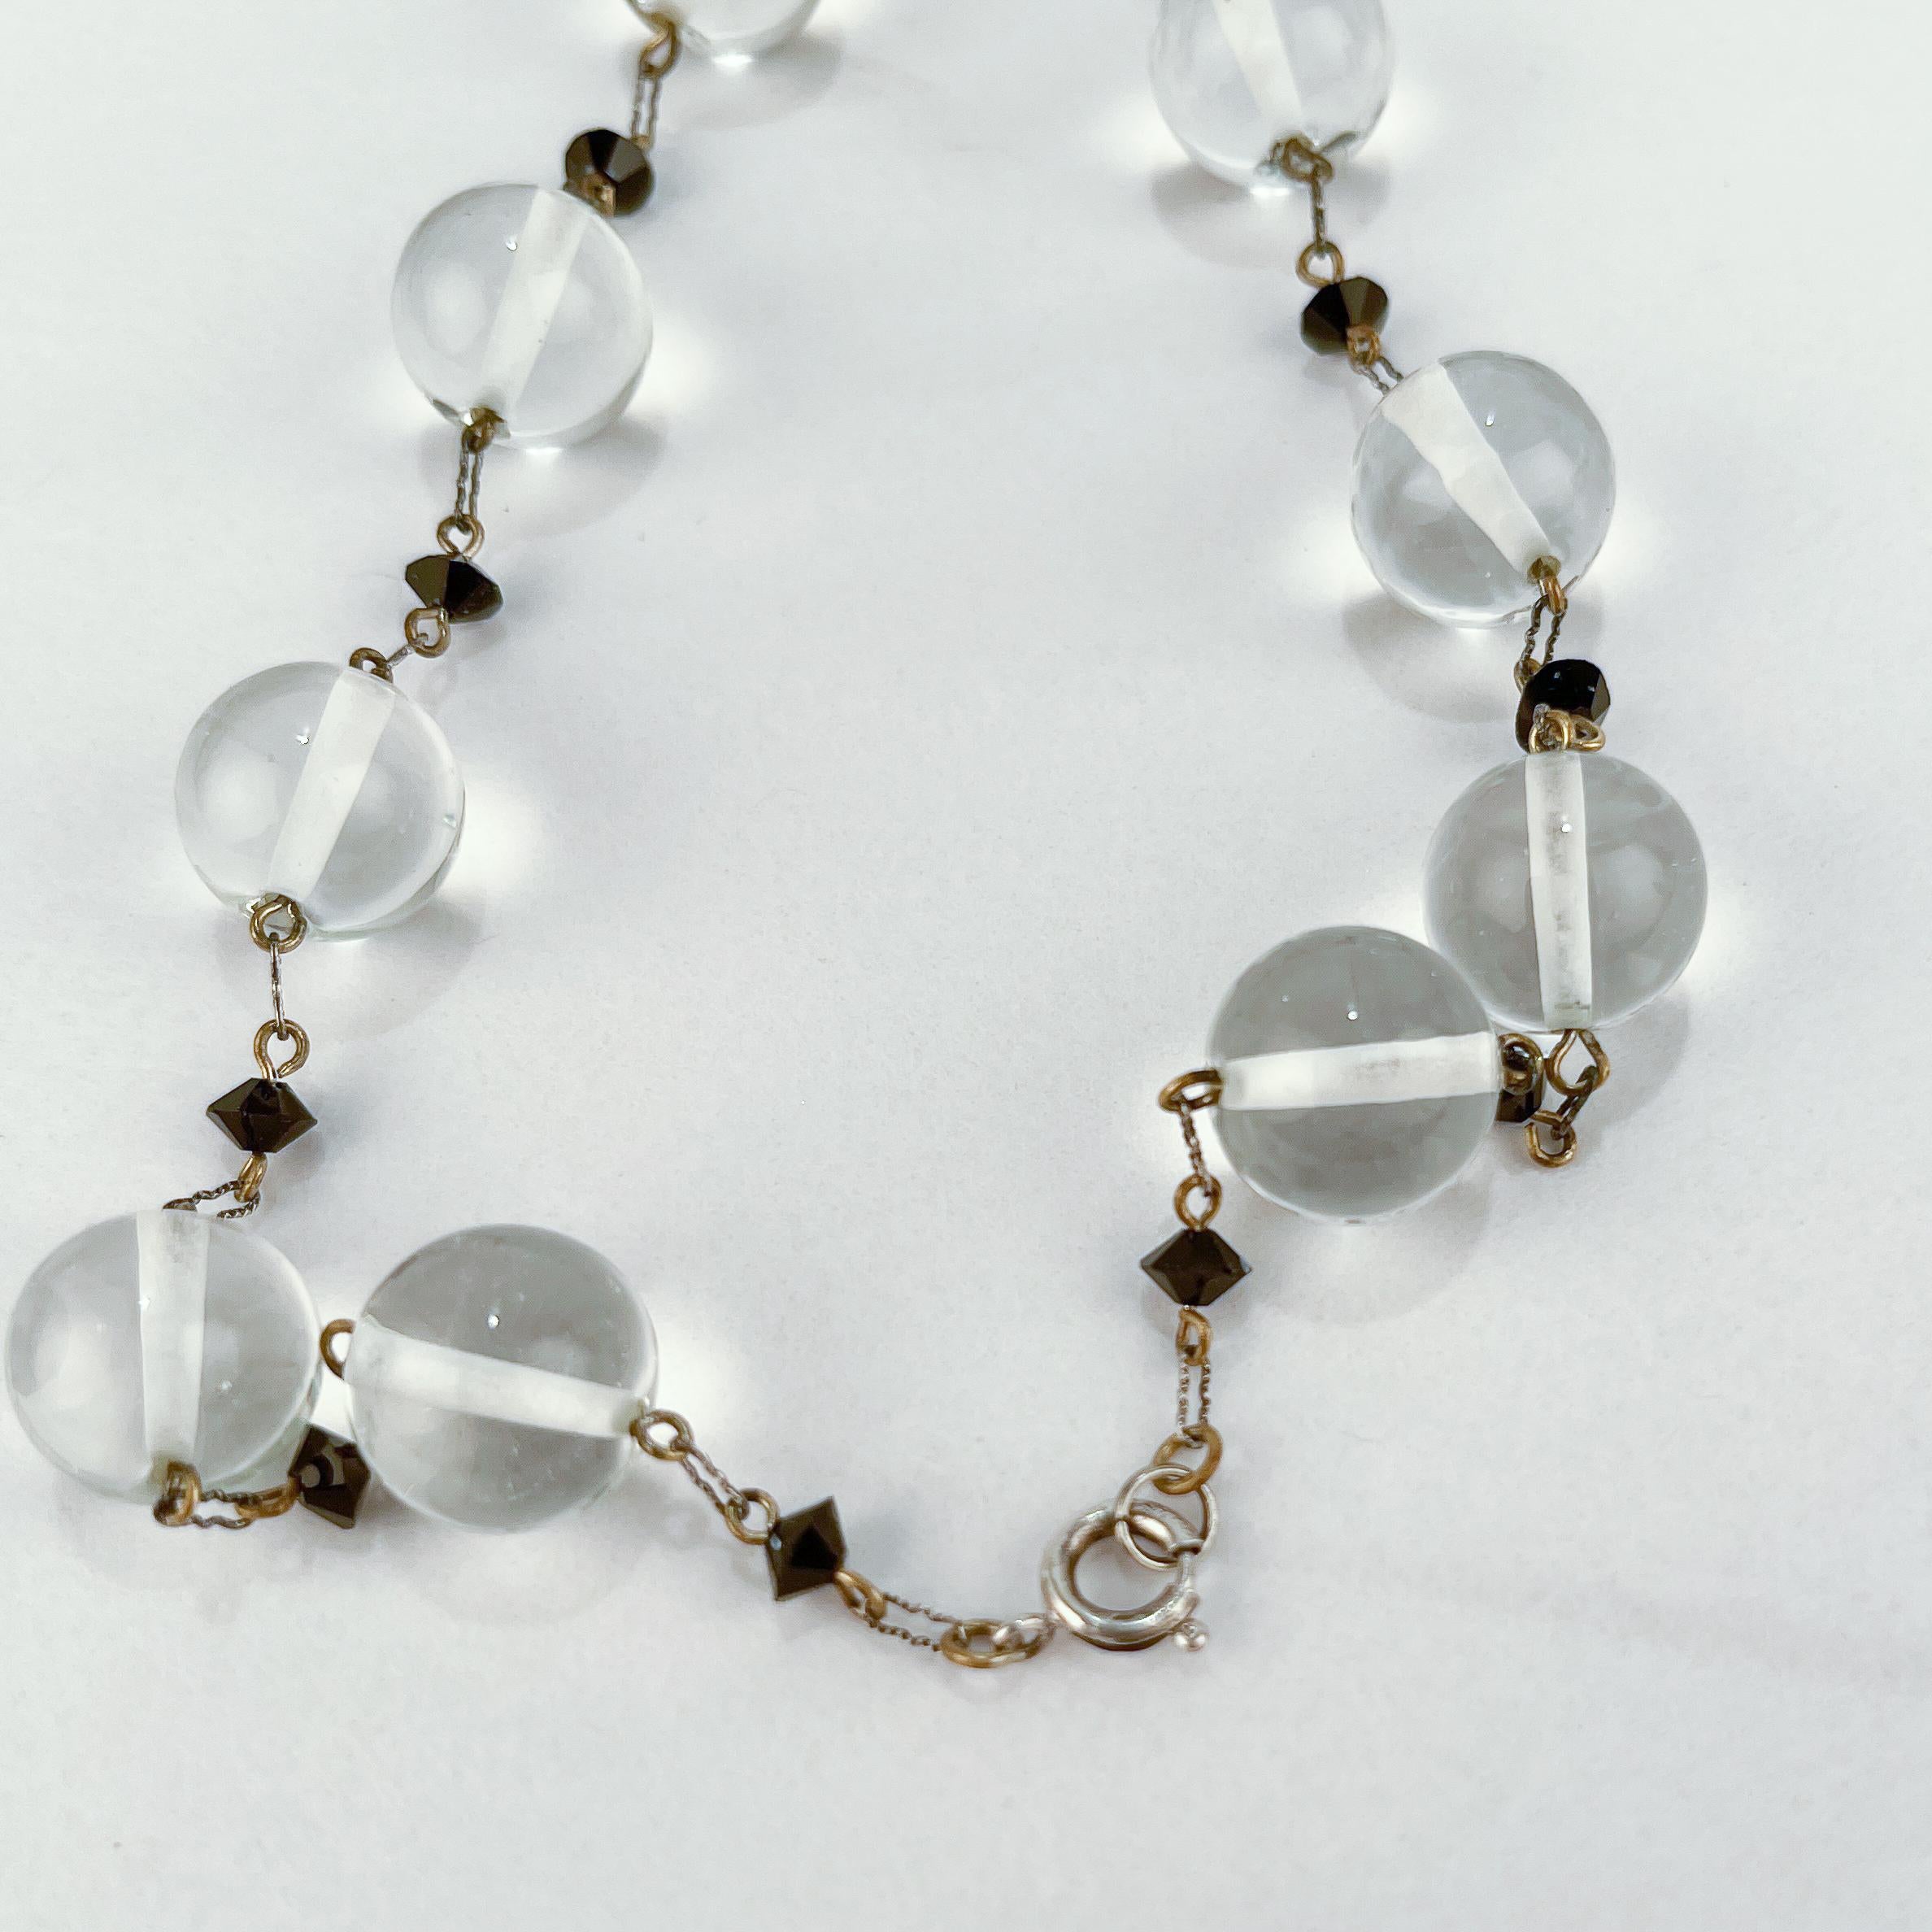 Retro Glass Bead & Sterling Silver Choker Necklace In Good Condition For Sale In Philadelphia, PA